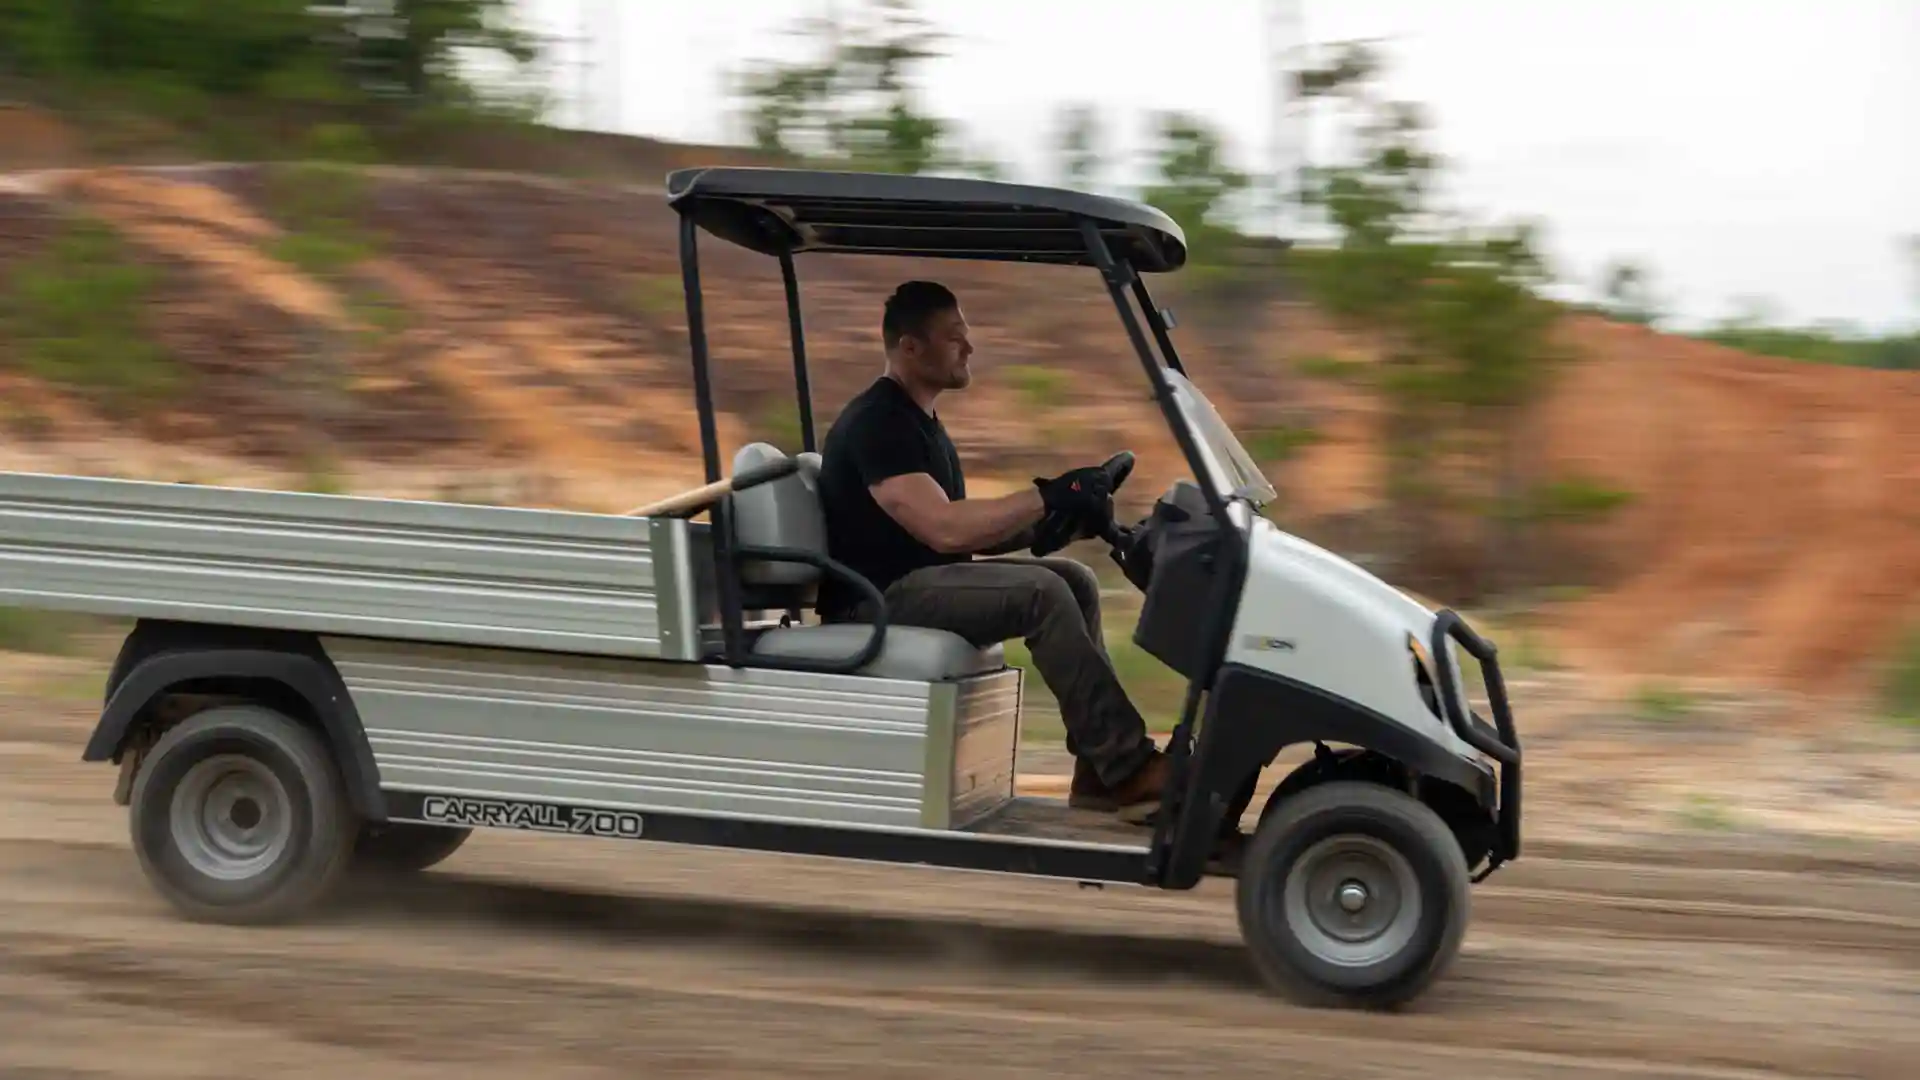 Carryall 700 work utility vehicle in motion